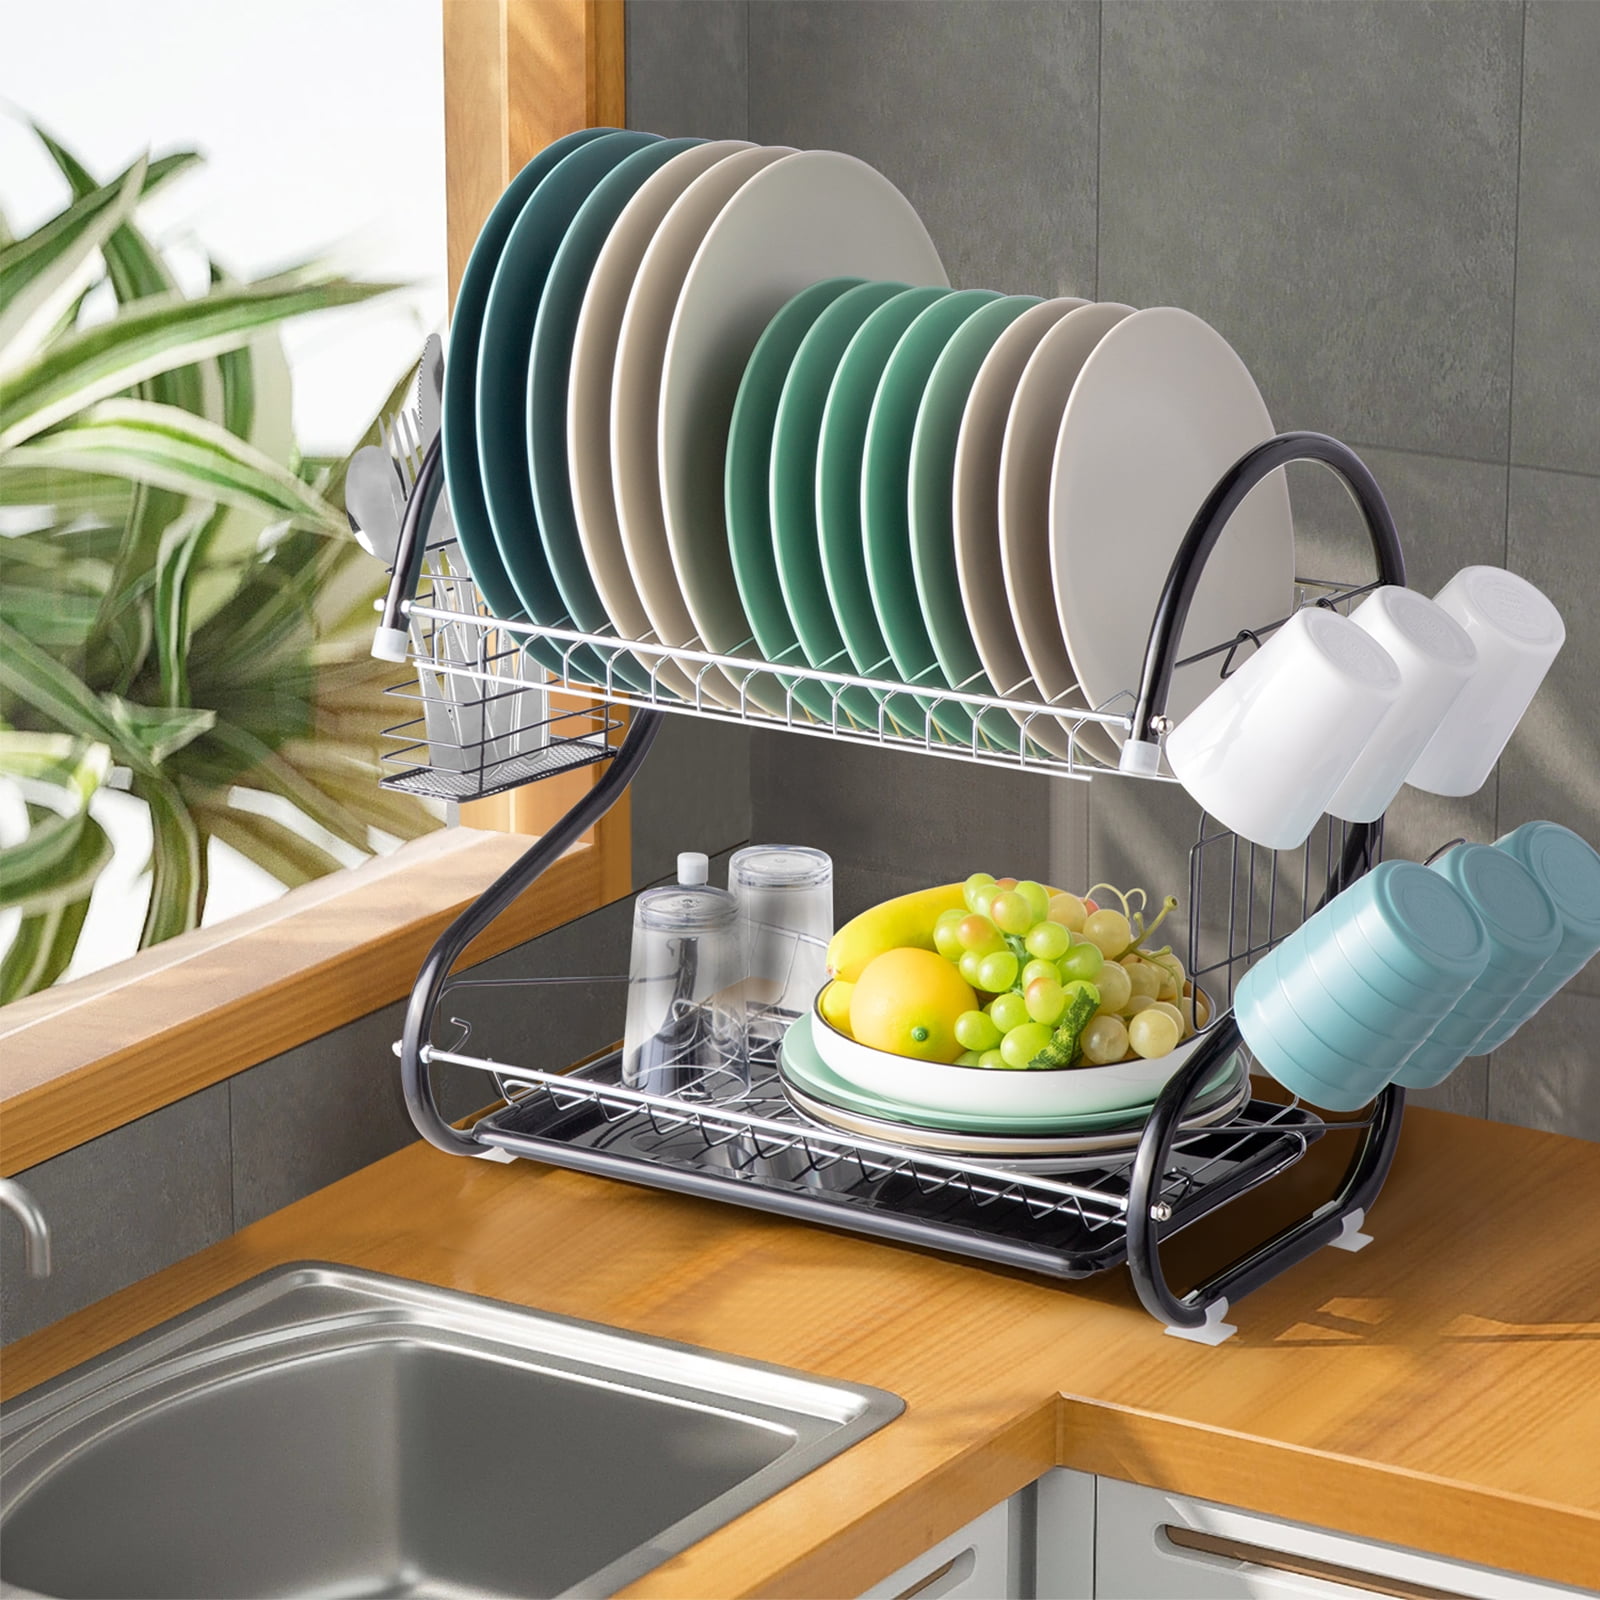 Kitidy All-in-One Portable Dish Drying Rack - Store And Dry Plates